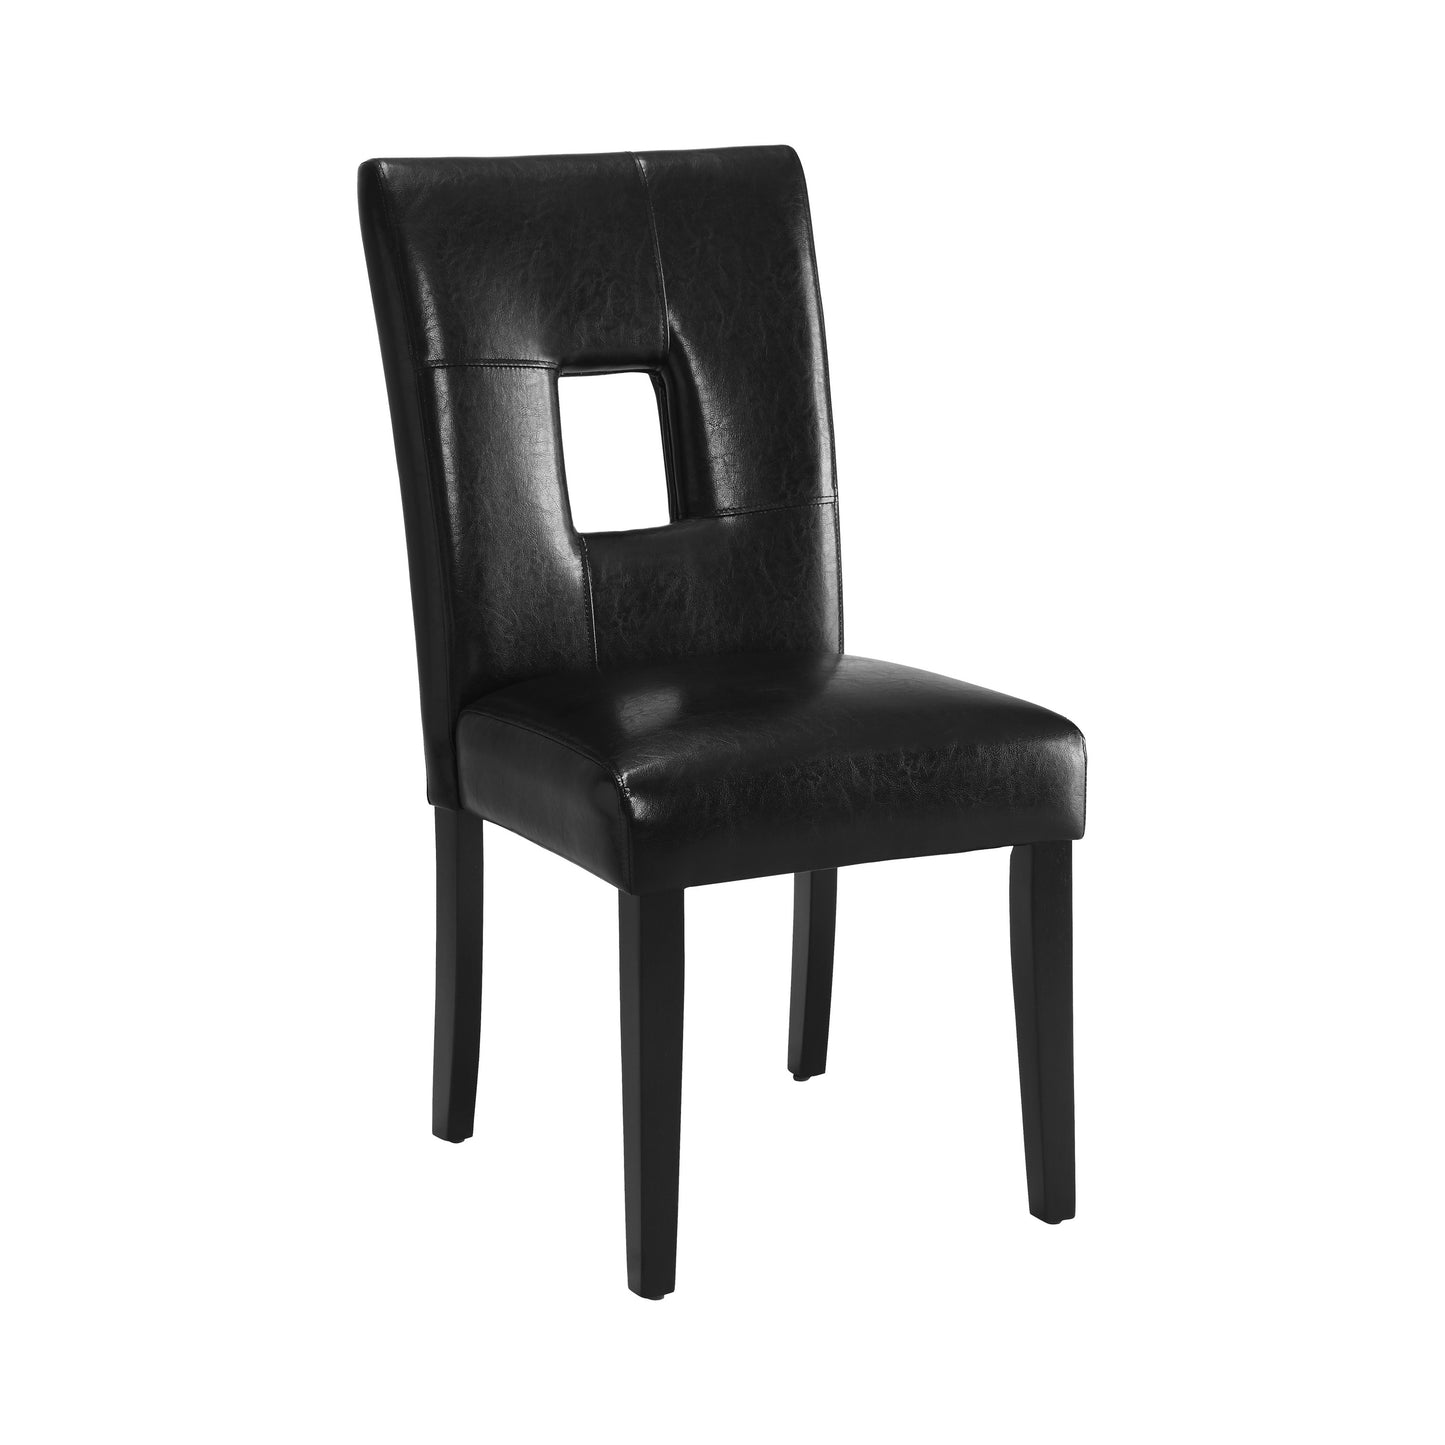 Shannon Open Back Upholstered Dining Chairs Black (Set of 2)